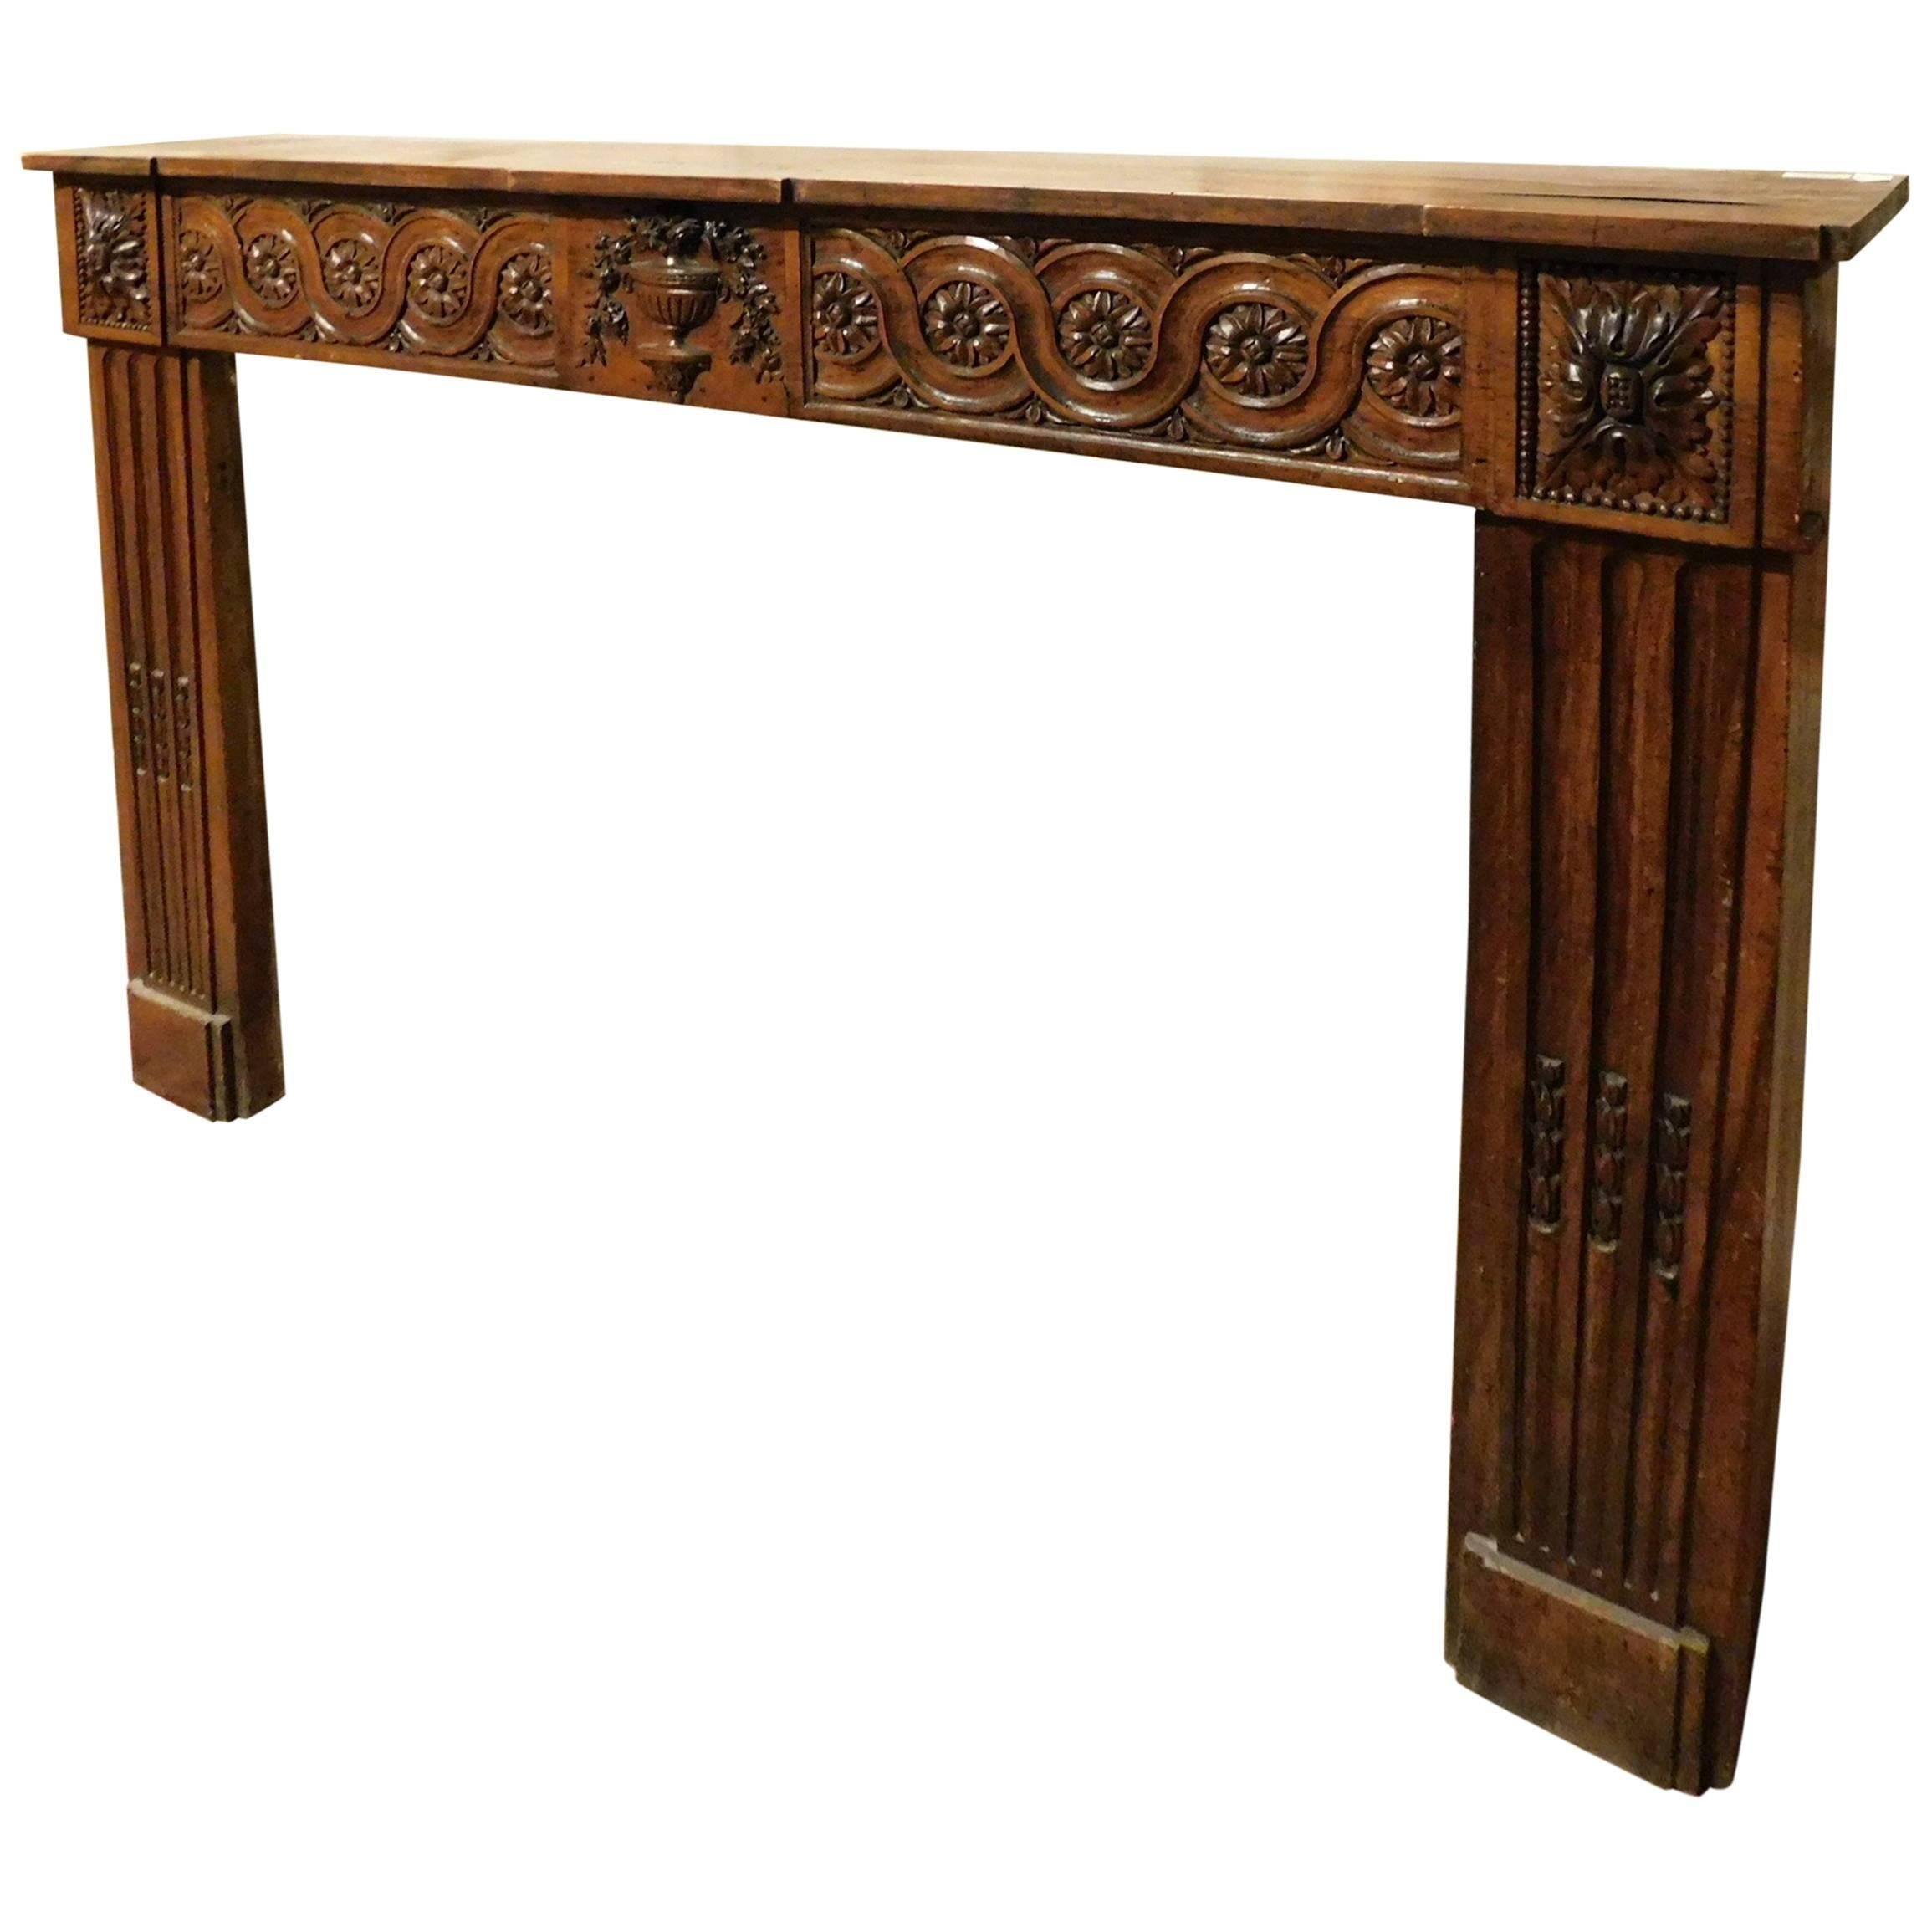 18th Century Richly Carved Wood Fireplace Mantel